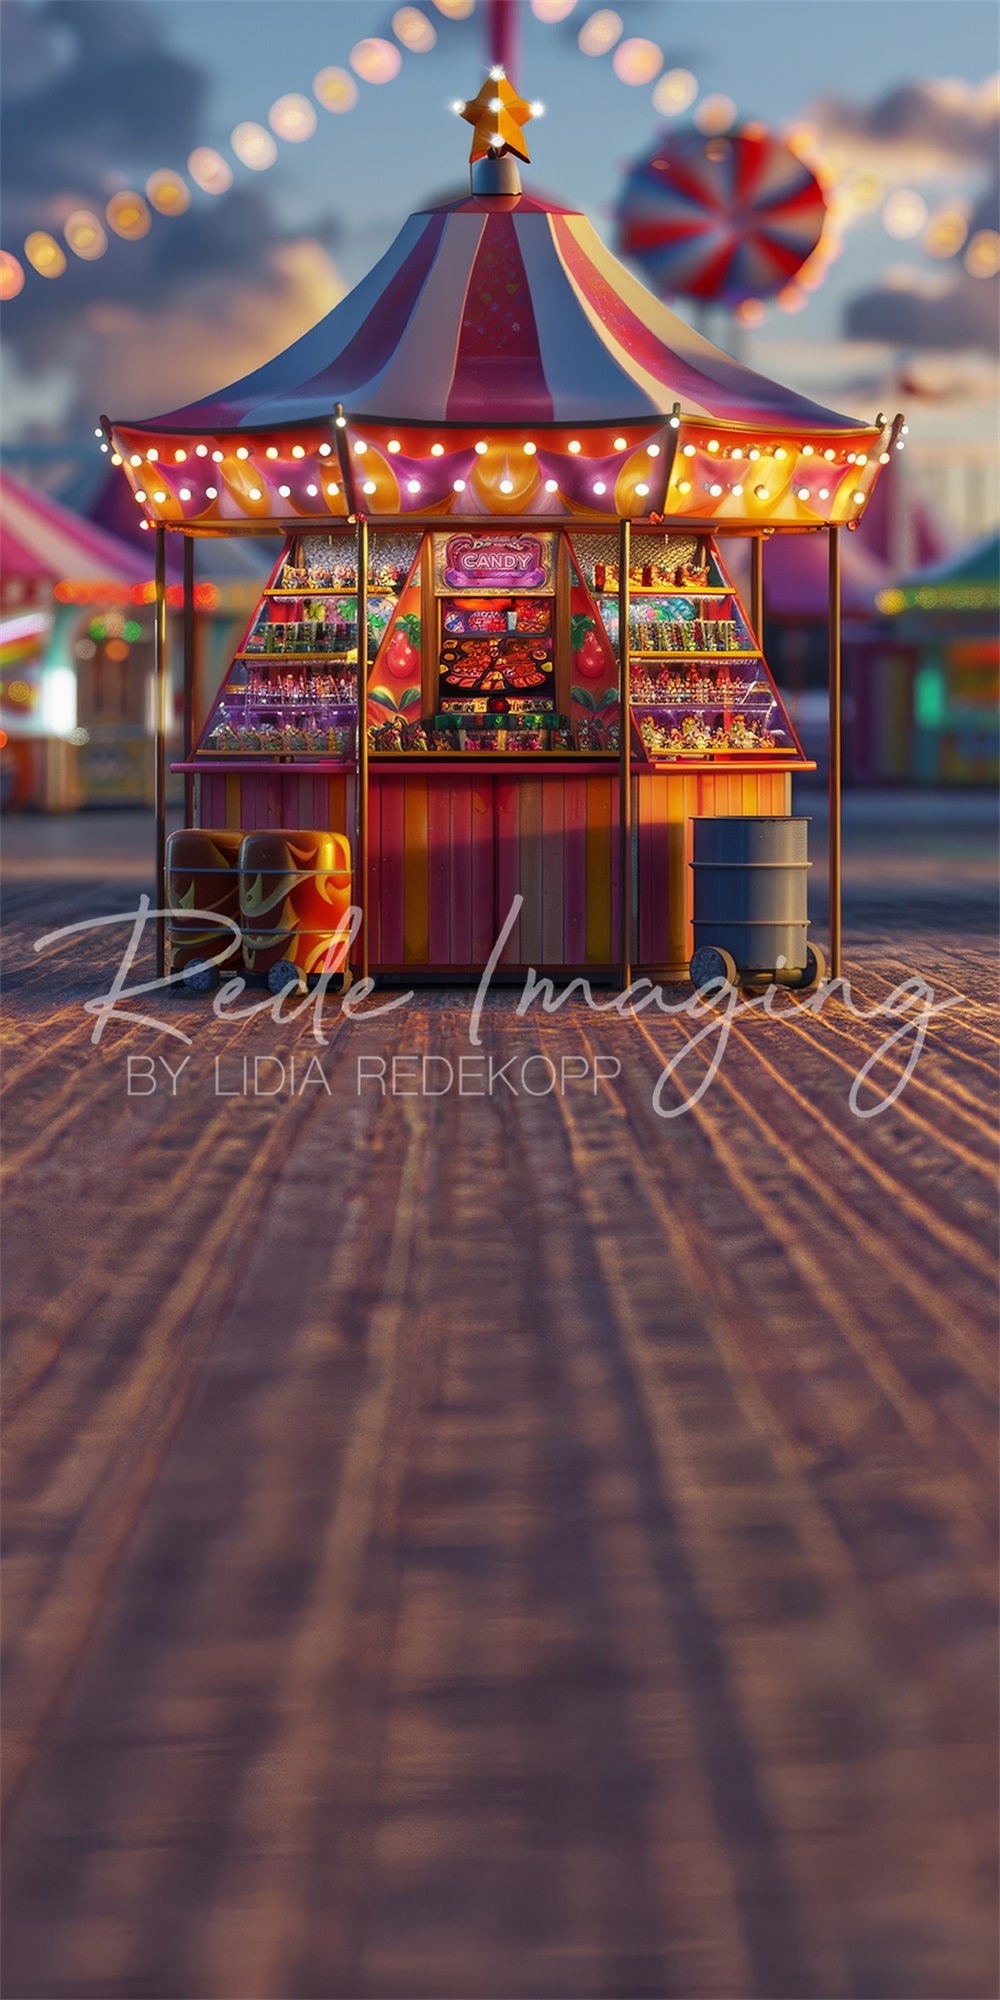 Kate Sweep Modern Carnival Circus Candy Store Backdrop Designed by Lidia Redekopp